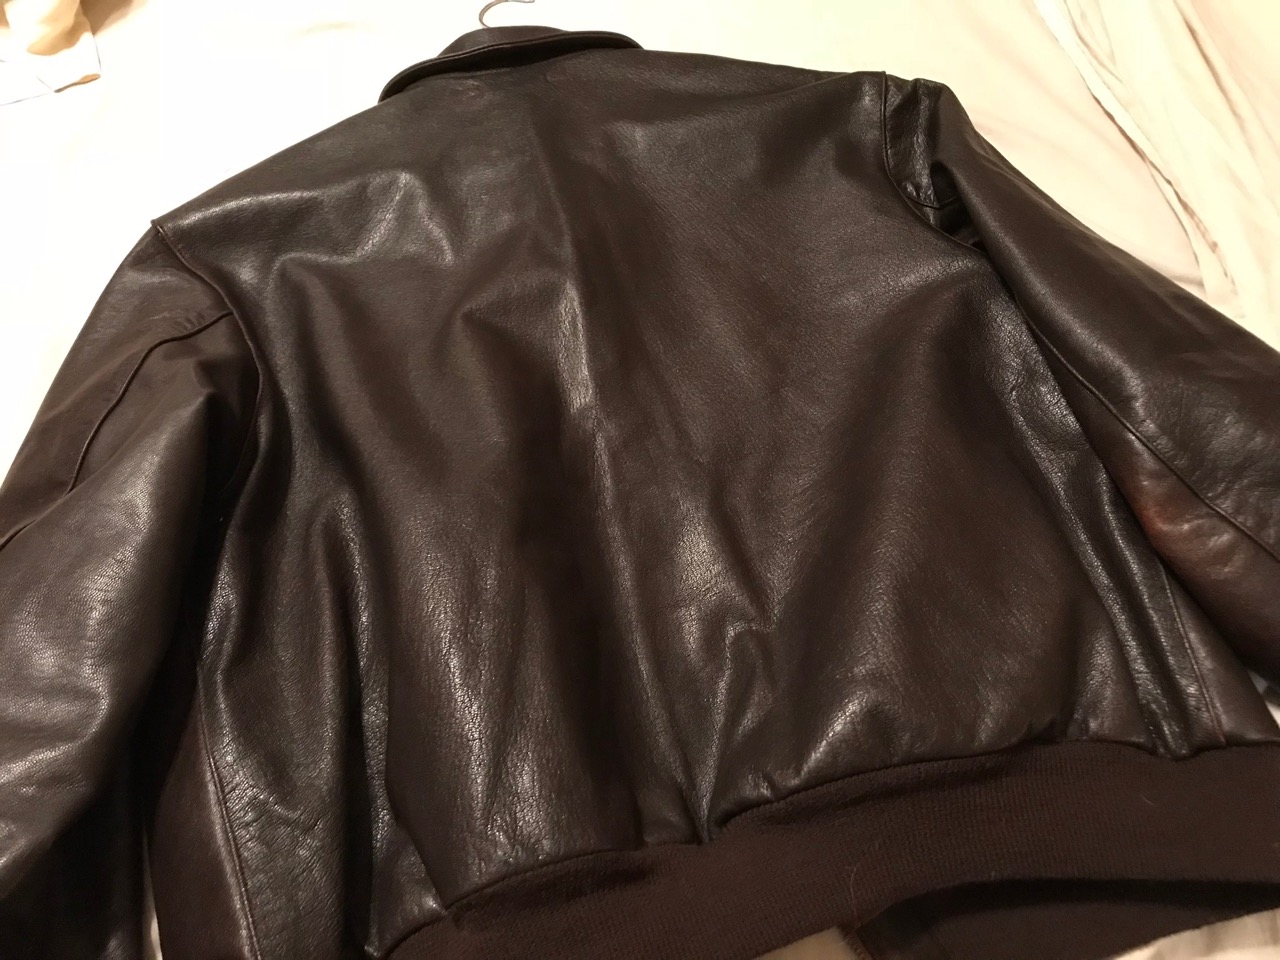 My New SM Wholesale A-2 | Vintage Leather Jackets Forum